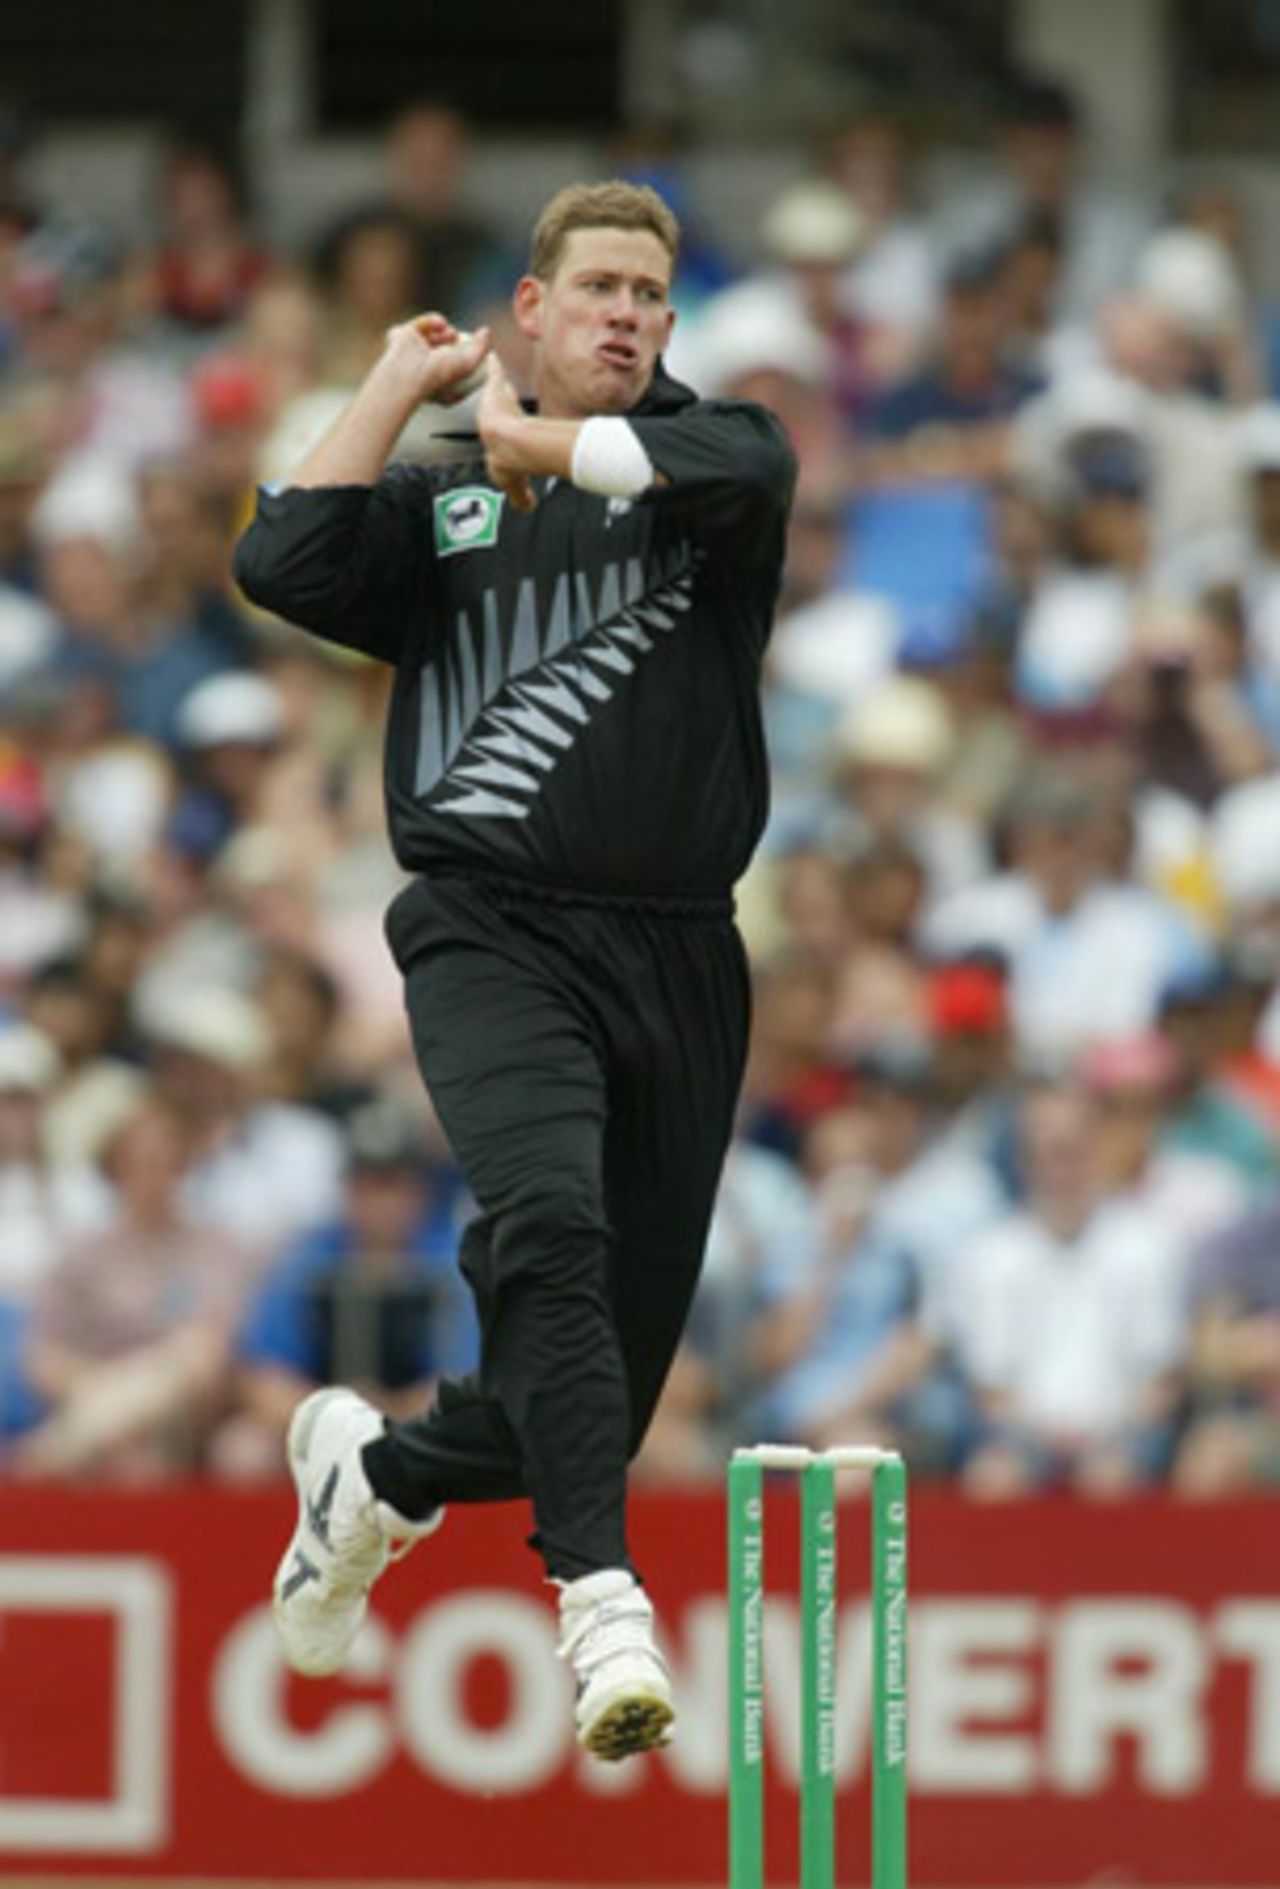 New Zealand bowler Jacob Oram delivers a ball during his spell of 5-26 off 10 overs. 1st ODI: New Zealand v India at Eden Park, Auckland, 26 December 2002.